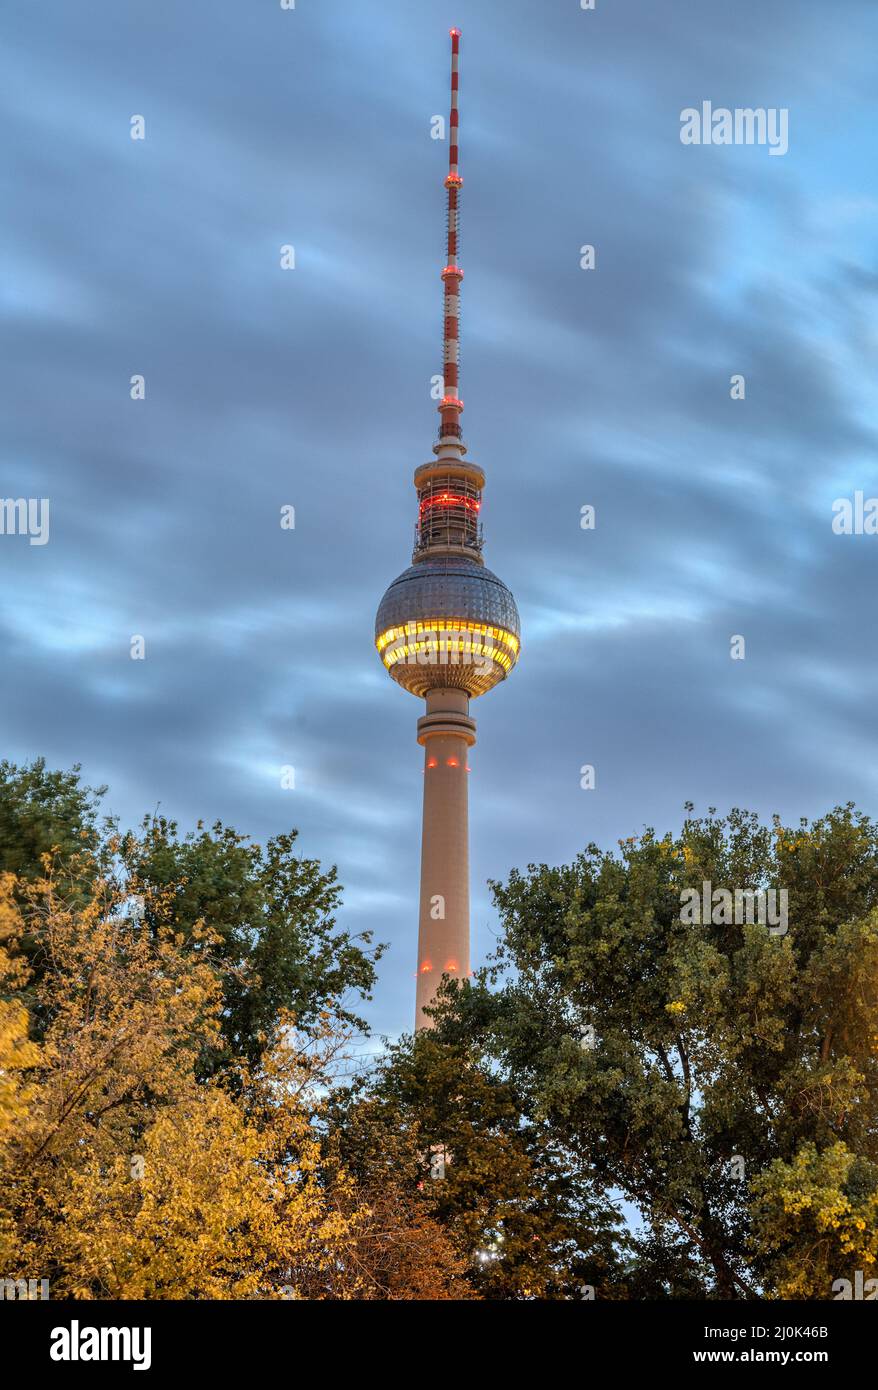 The famous TV Tower in Berlin at dawn seen through some trees Stock Photo